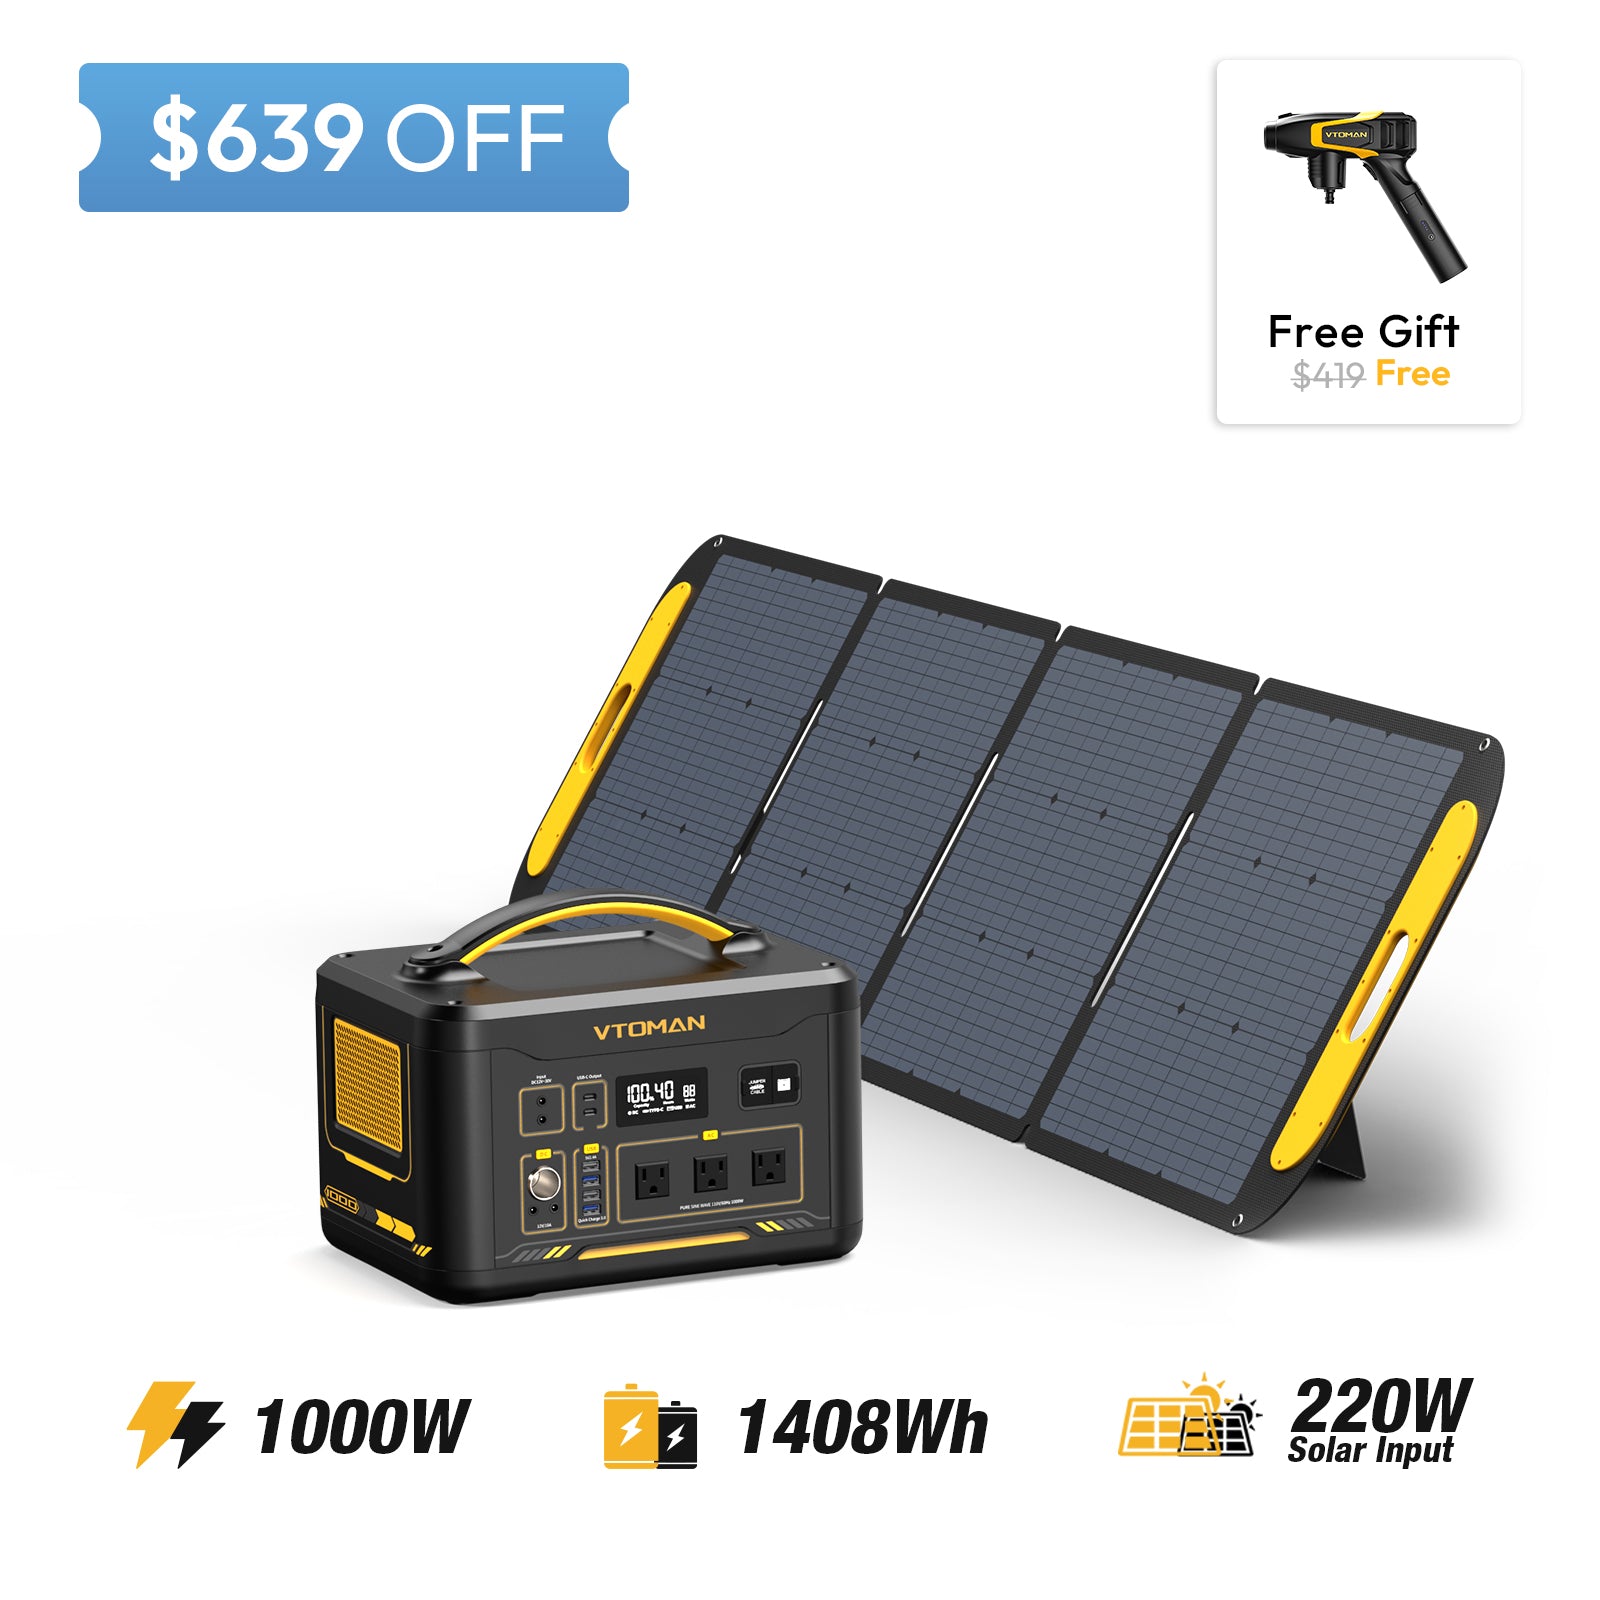 jump 1000 and VS220 solar panel save $639 in summer sale